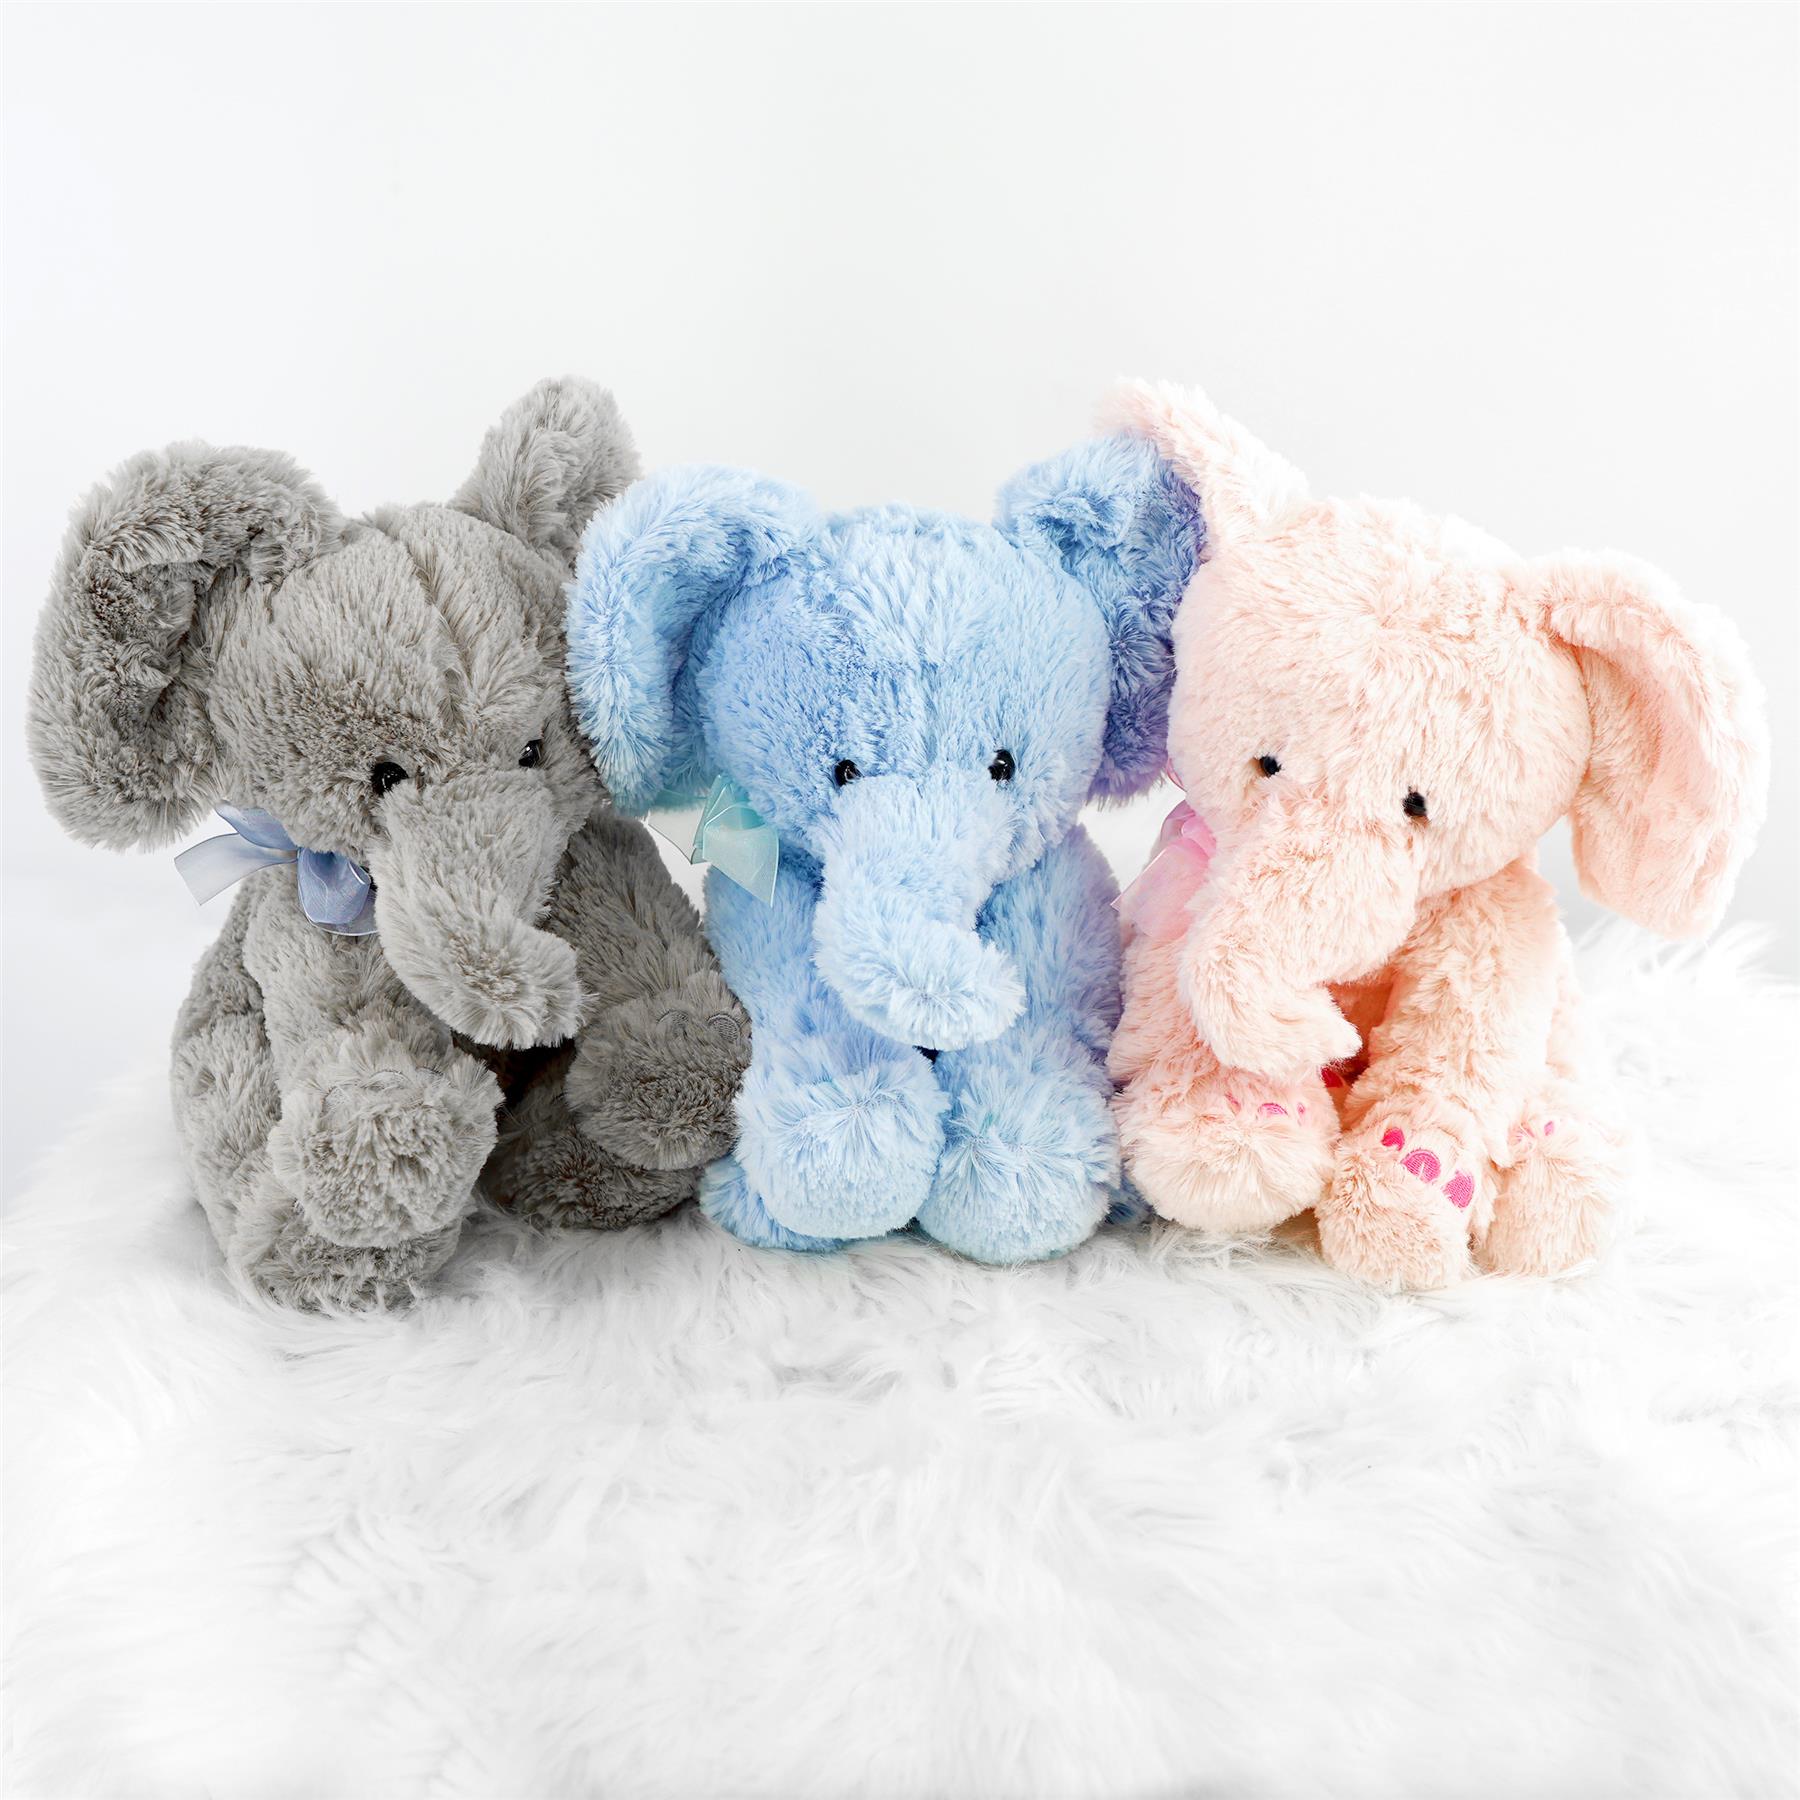 The Magic Toy Shop Toys and Games Blue Plush Elephant Soft Toys